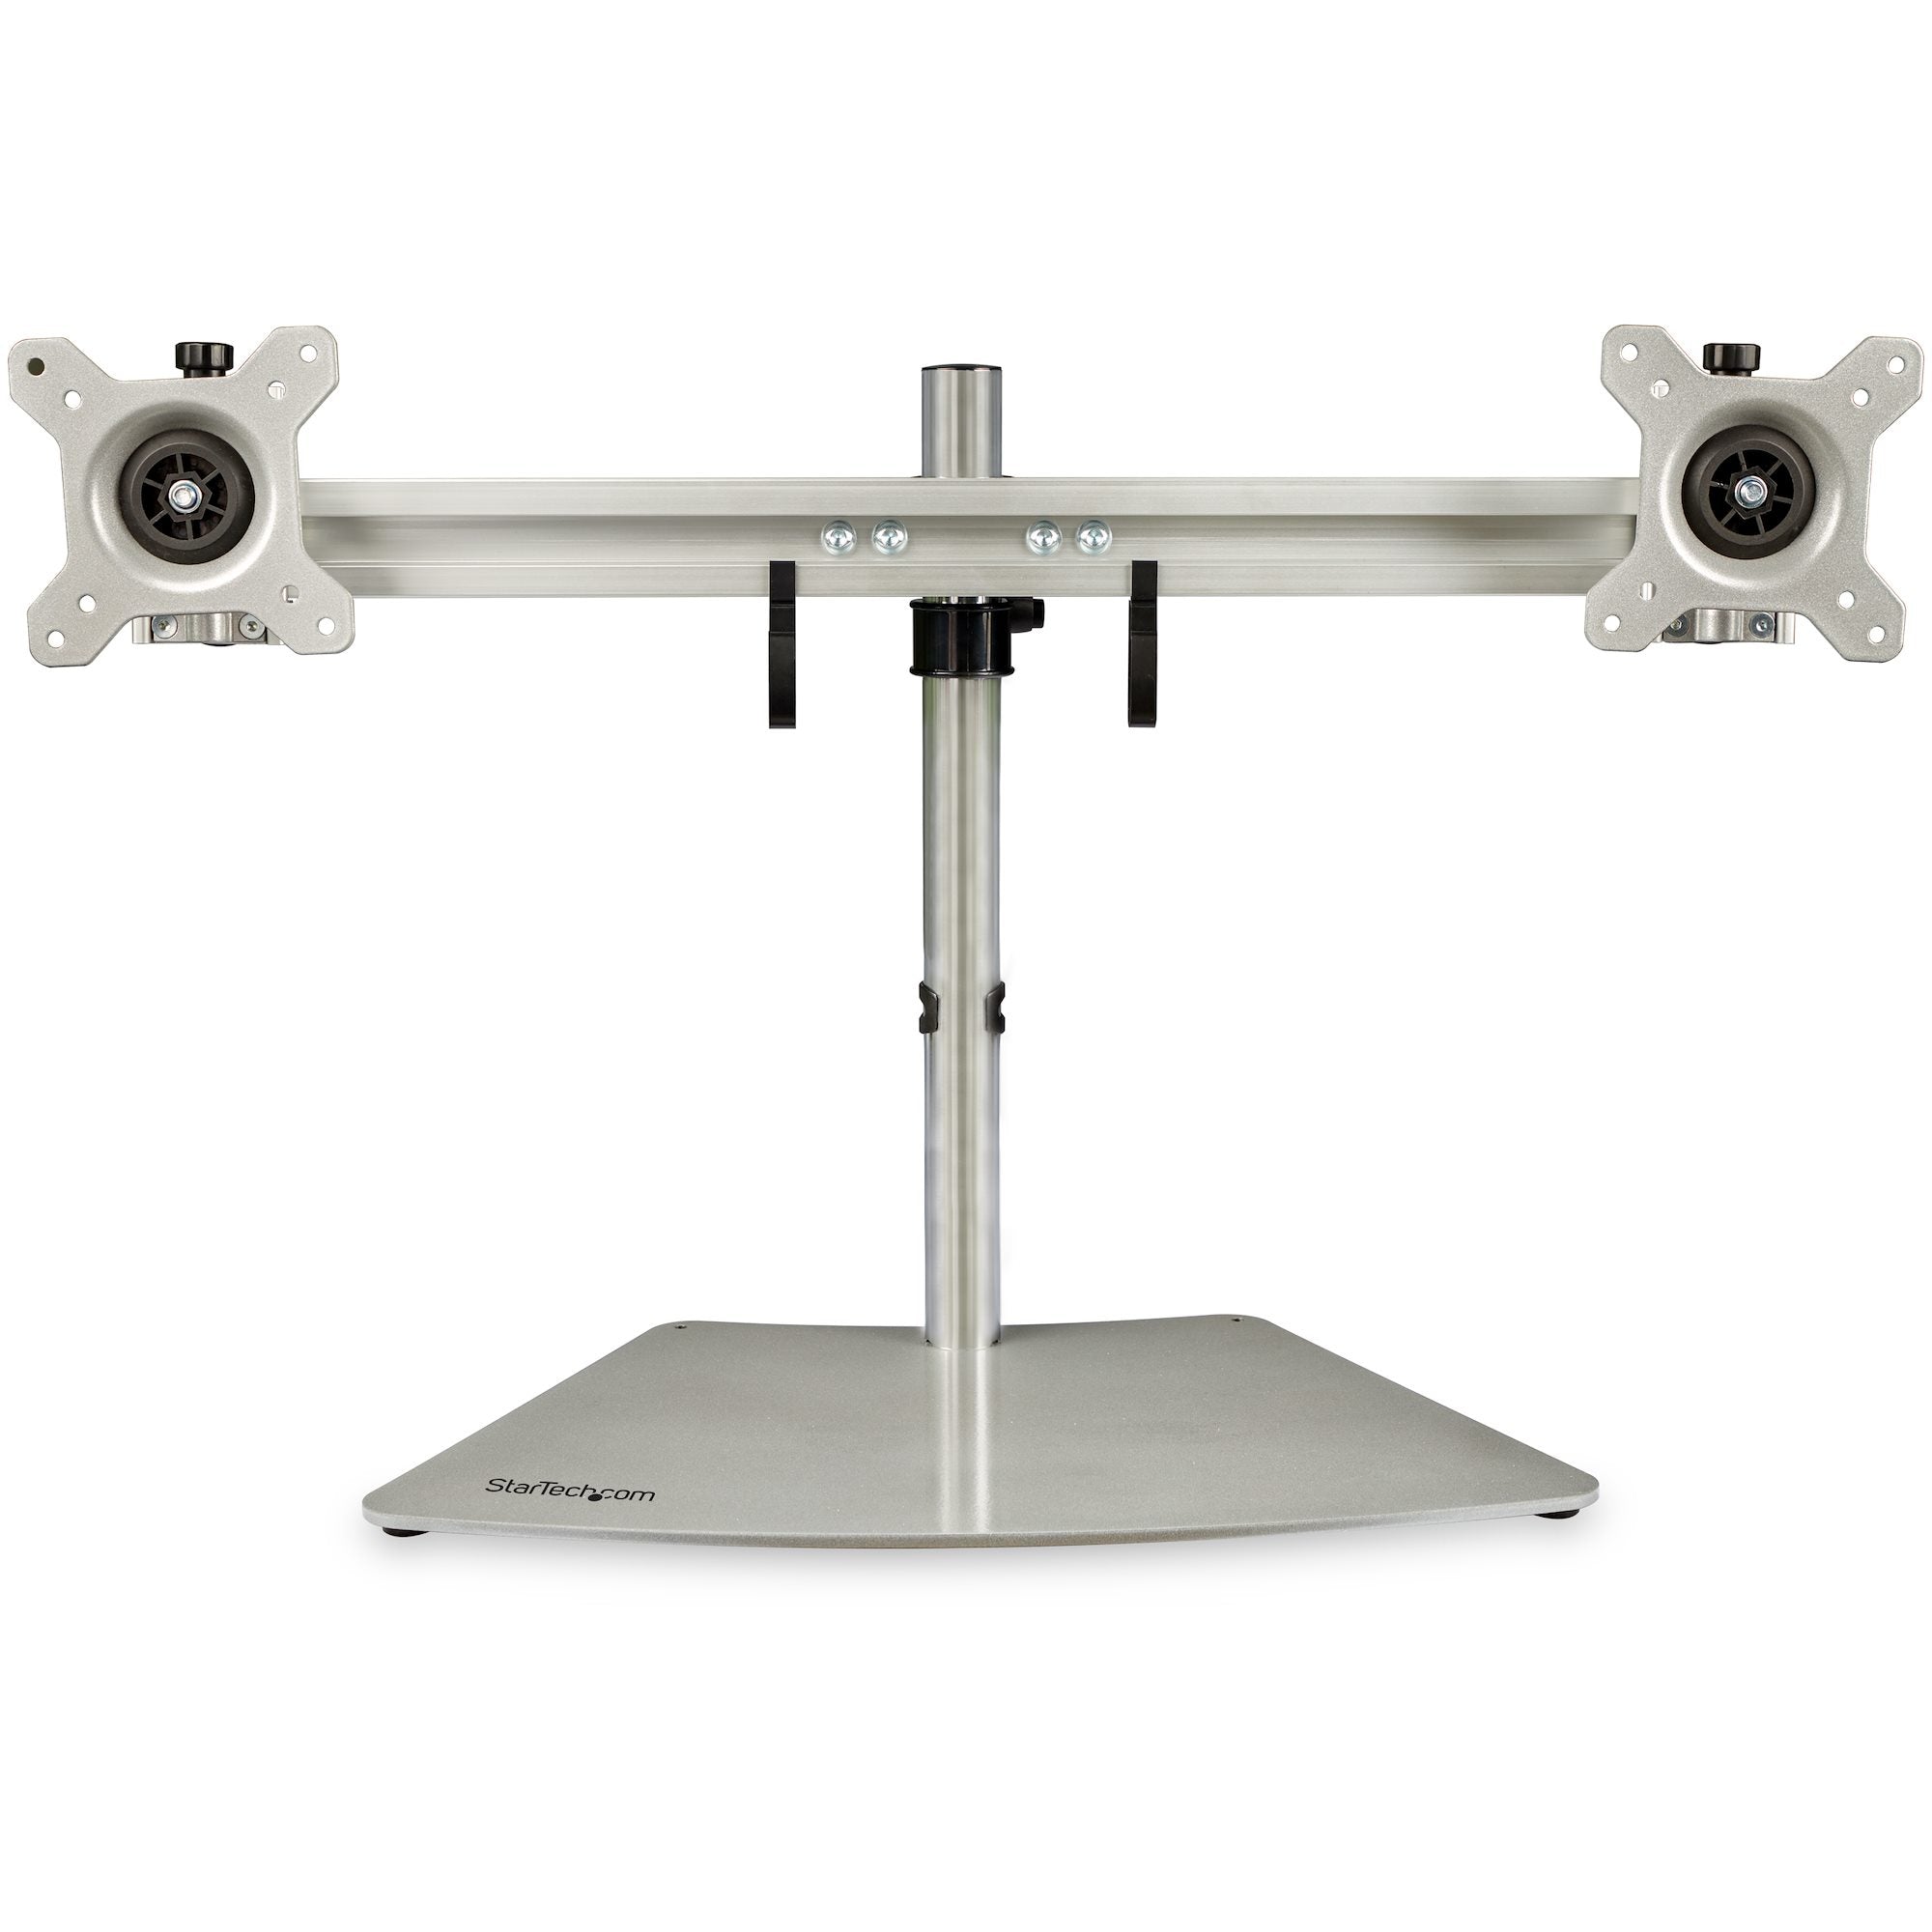 StarTech.com Dual Monitor Stand - Ergonomic Free Standing Dual Monitor Desktop Stand for two 24" VESA Mount Displays - Synchronized Height Adjustable - Double Monitor Pole Mount - Silver